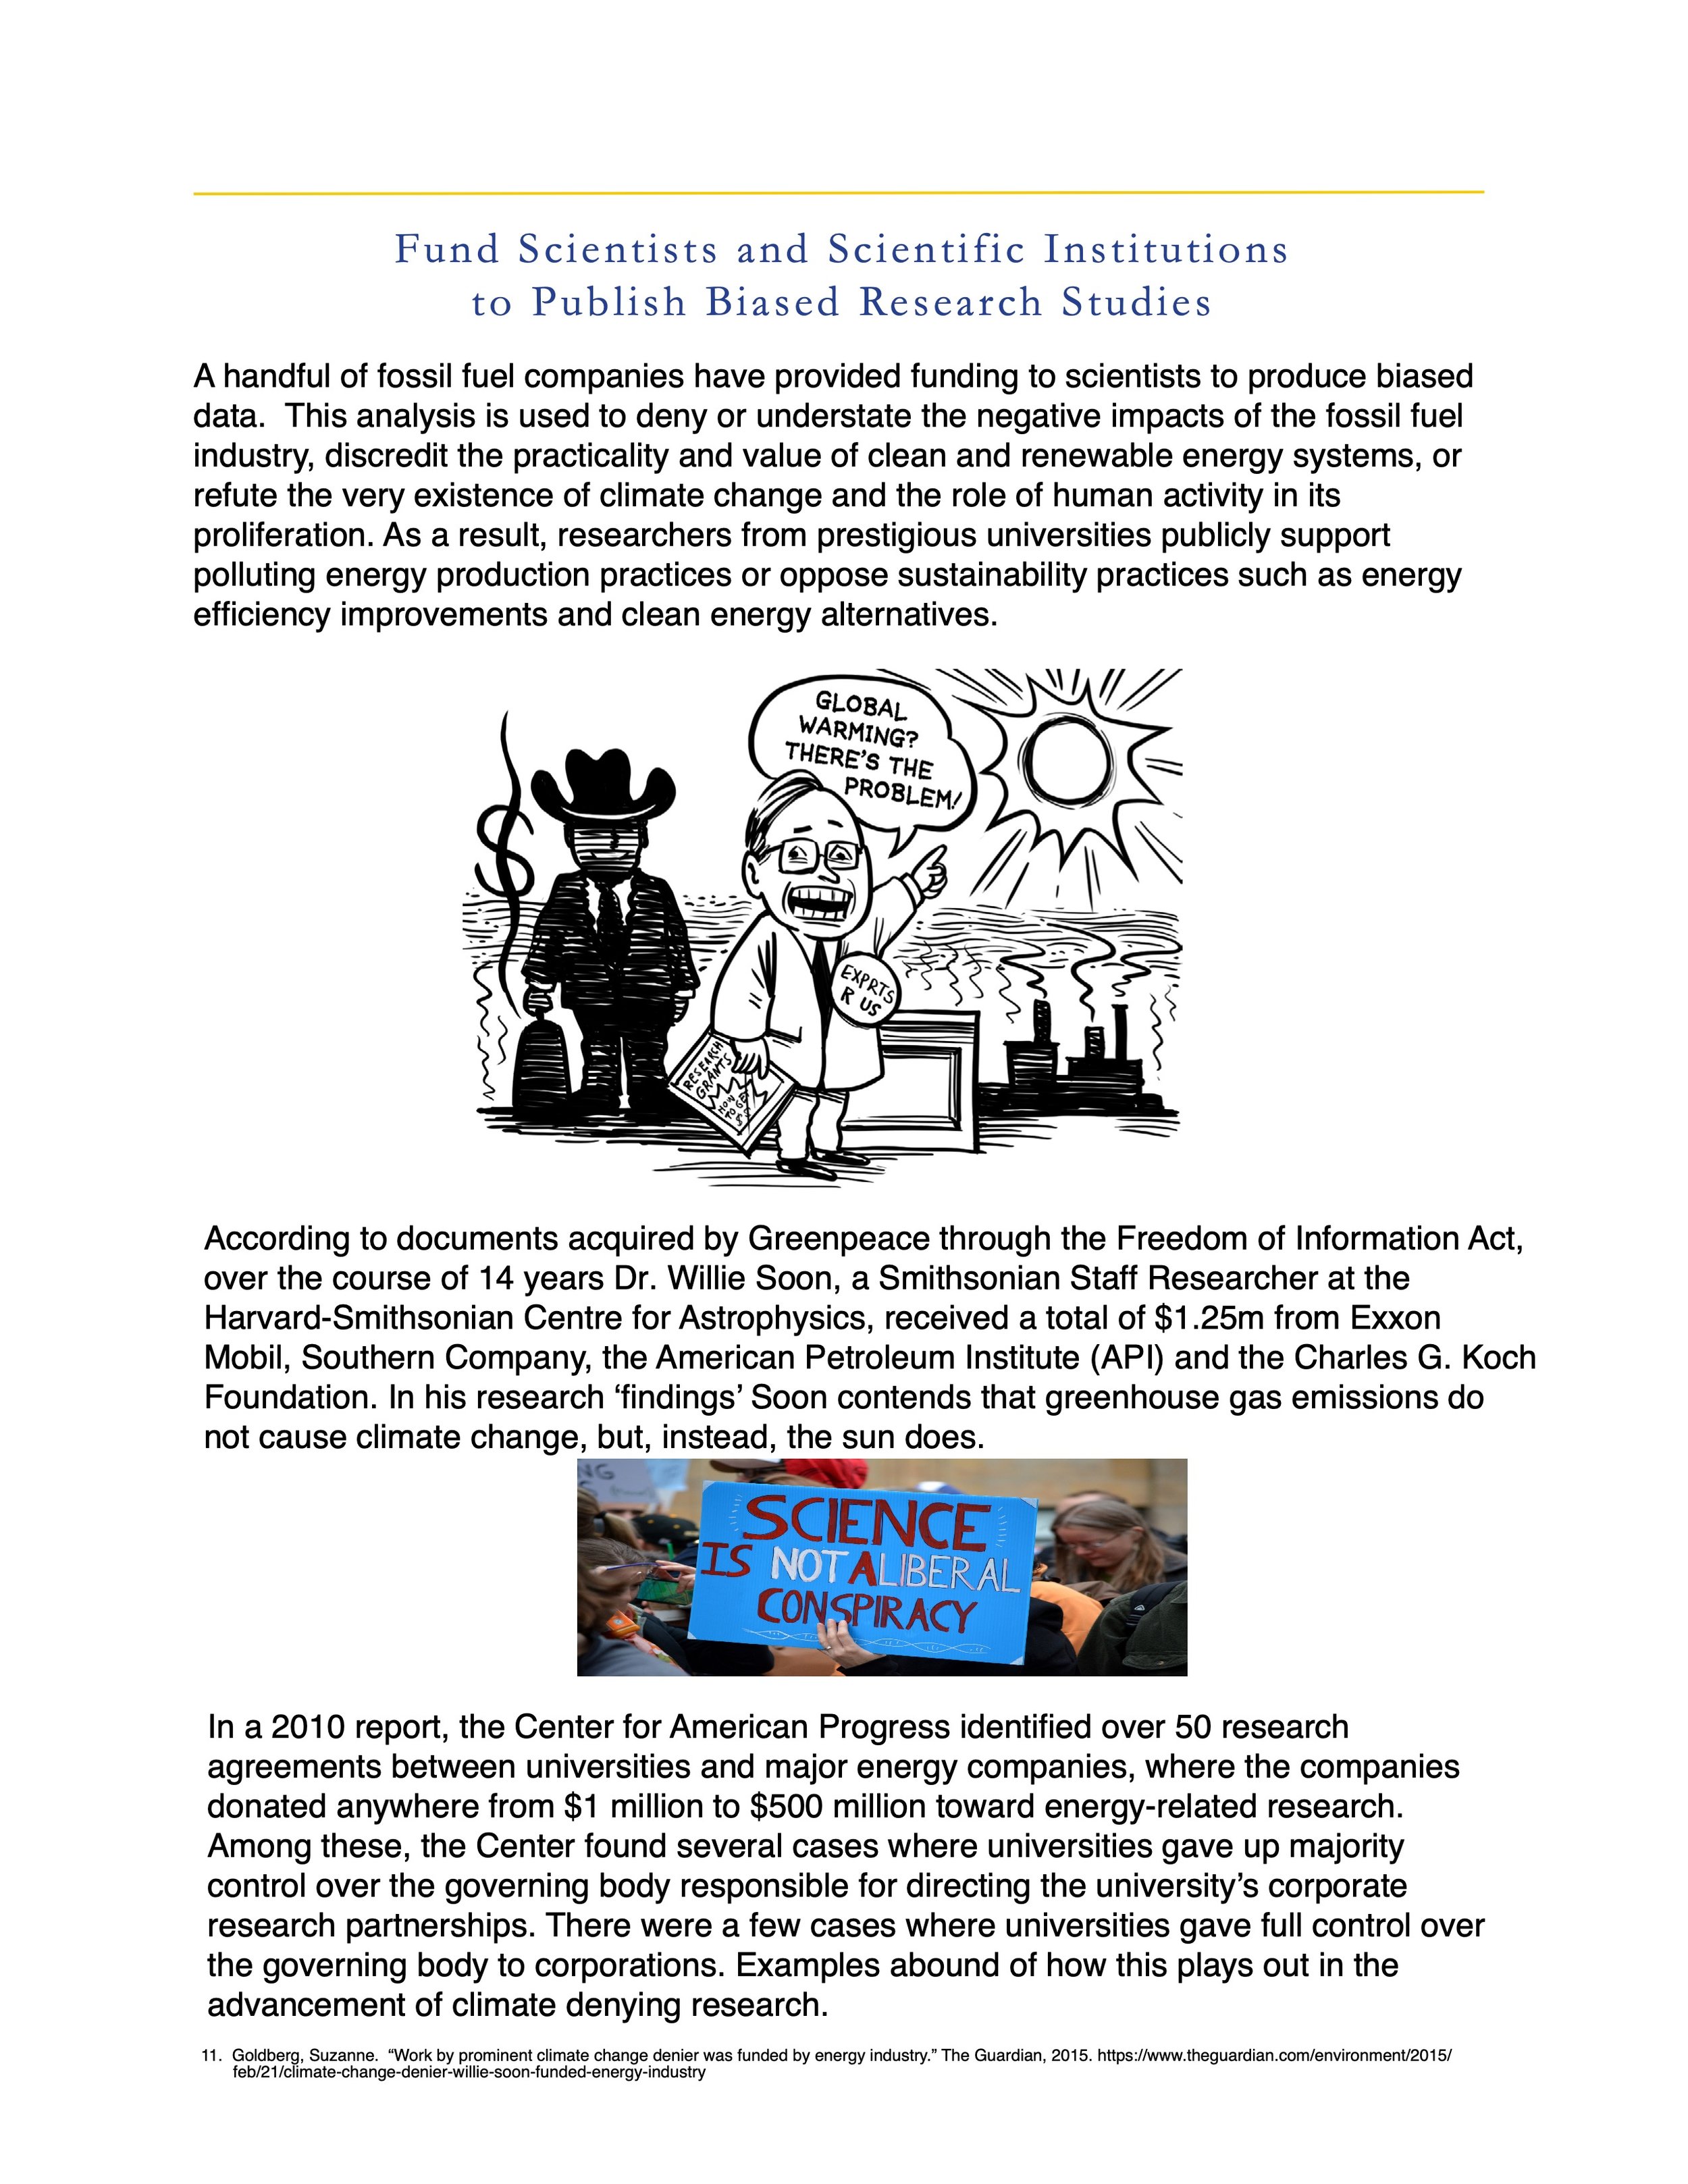 Fossil-Fueled-Foolery-An-Illustrated-Primer-on-the-Top-10-Manipulation-Tactics-of-the-Fossil-Fuel-Industry 7.jpeg